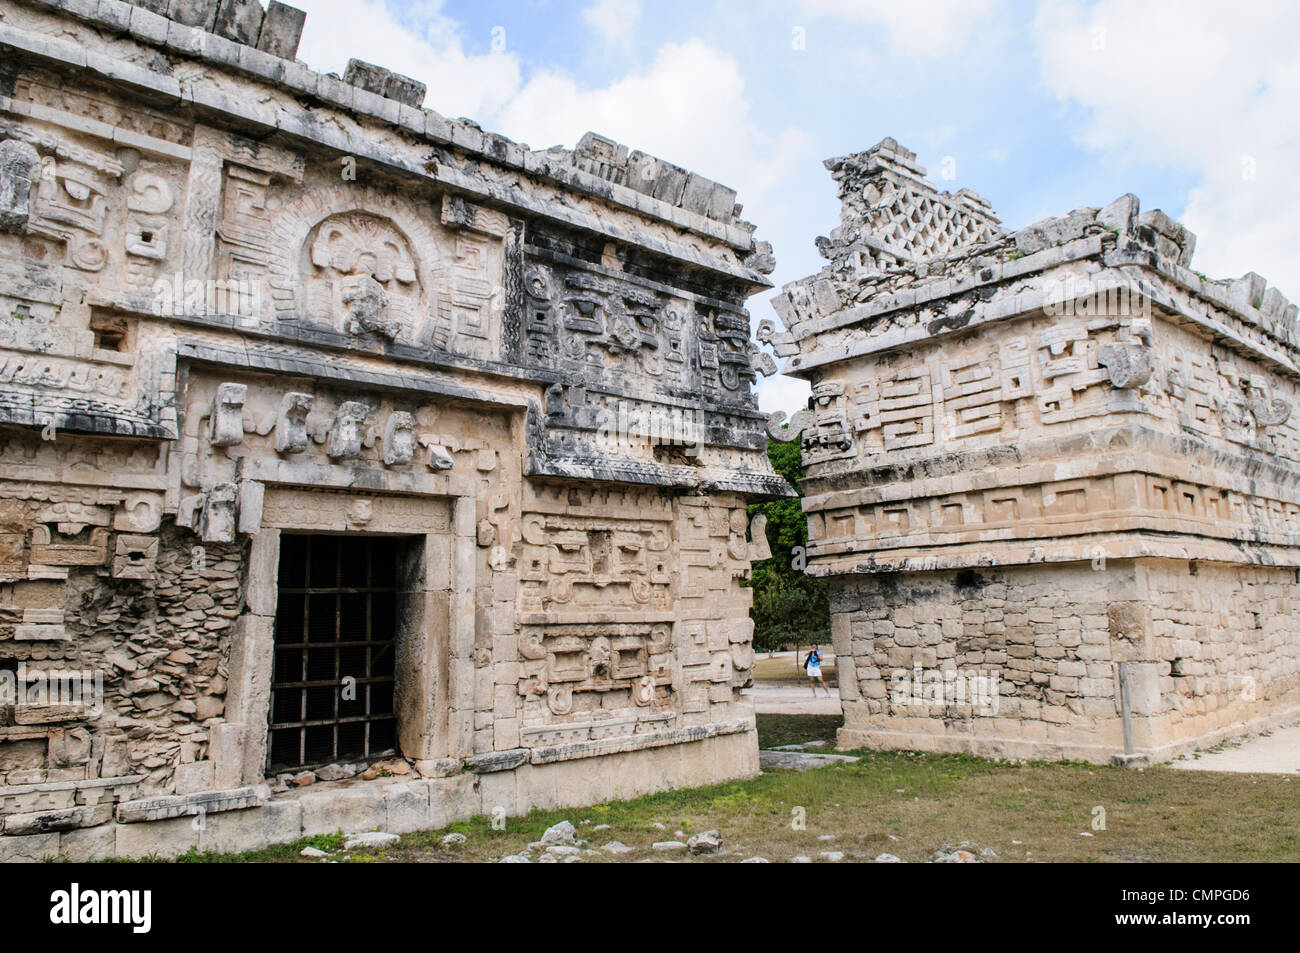 CHICHEN ITZA, Mexico - Ornately decorated buildings at Chichen Itza, a pre-Columbian archeological site in Yucatan, Mexico. This building is known as 'La Iglesia' and is in the Las Monjas complex of buildings. Stock Photo